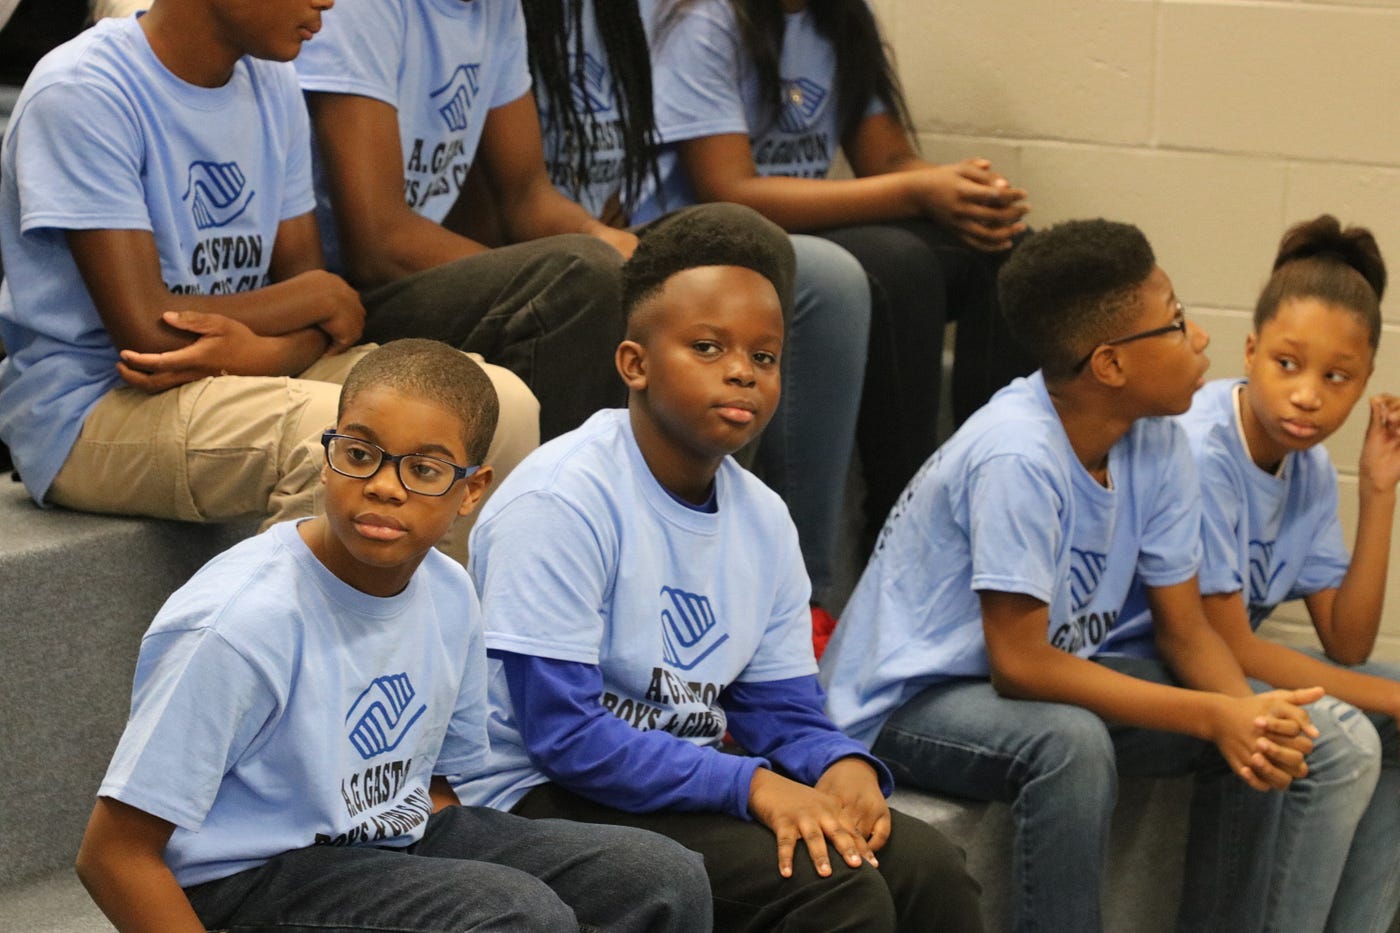 A.G. Gaston Boys and Girls Club opens new clubhouse on CrossPlex campus